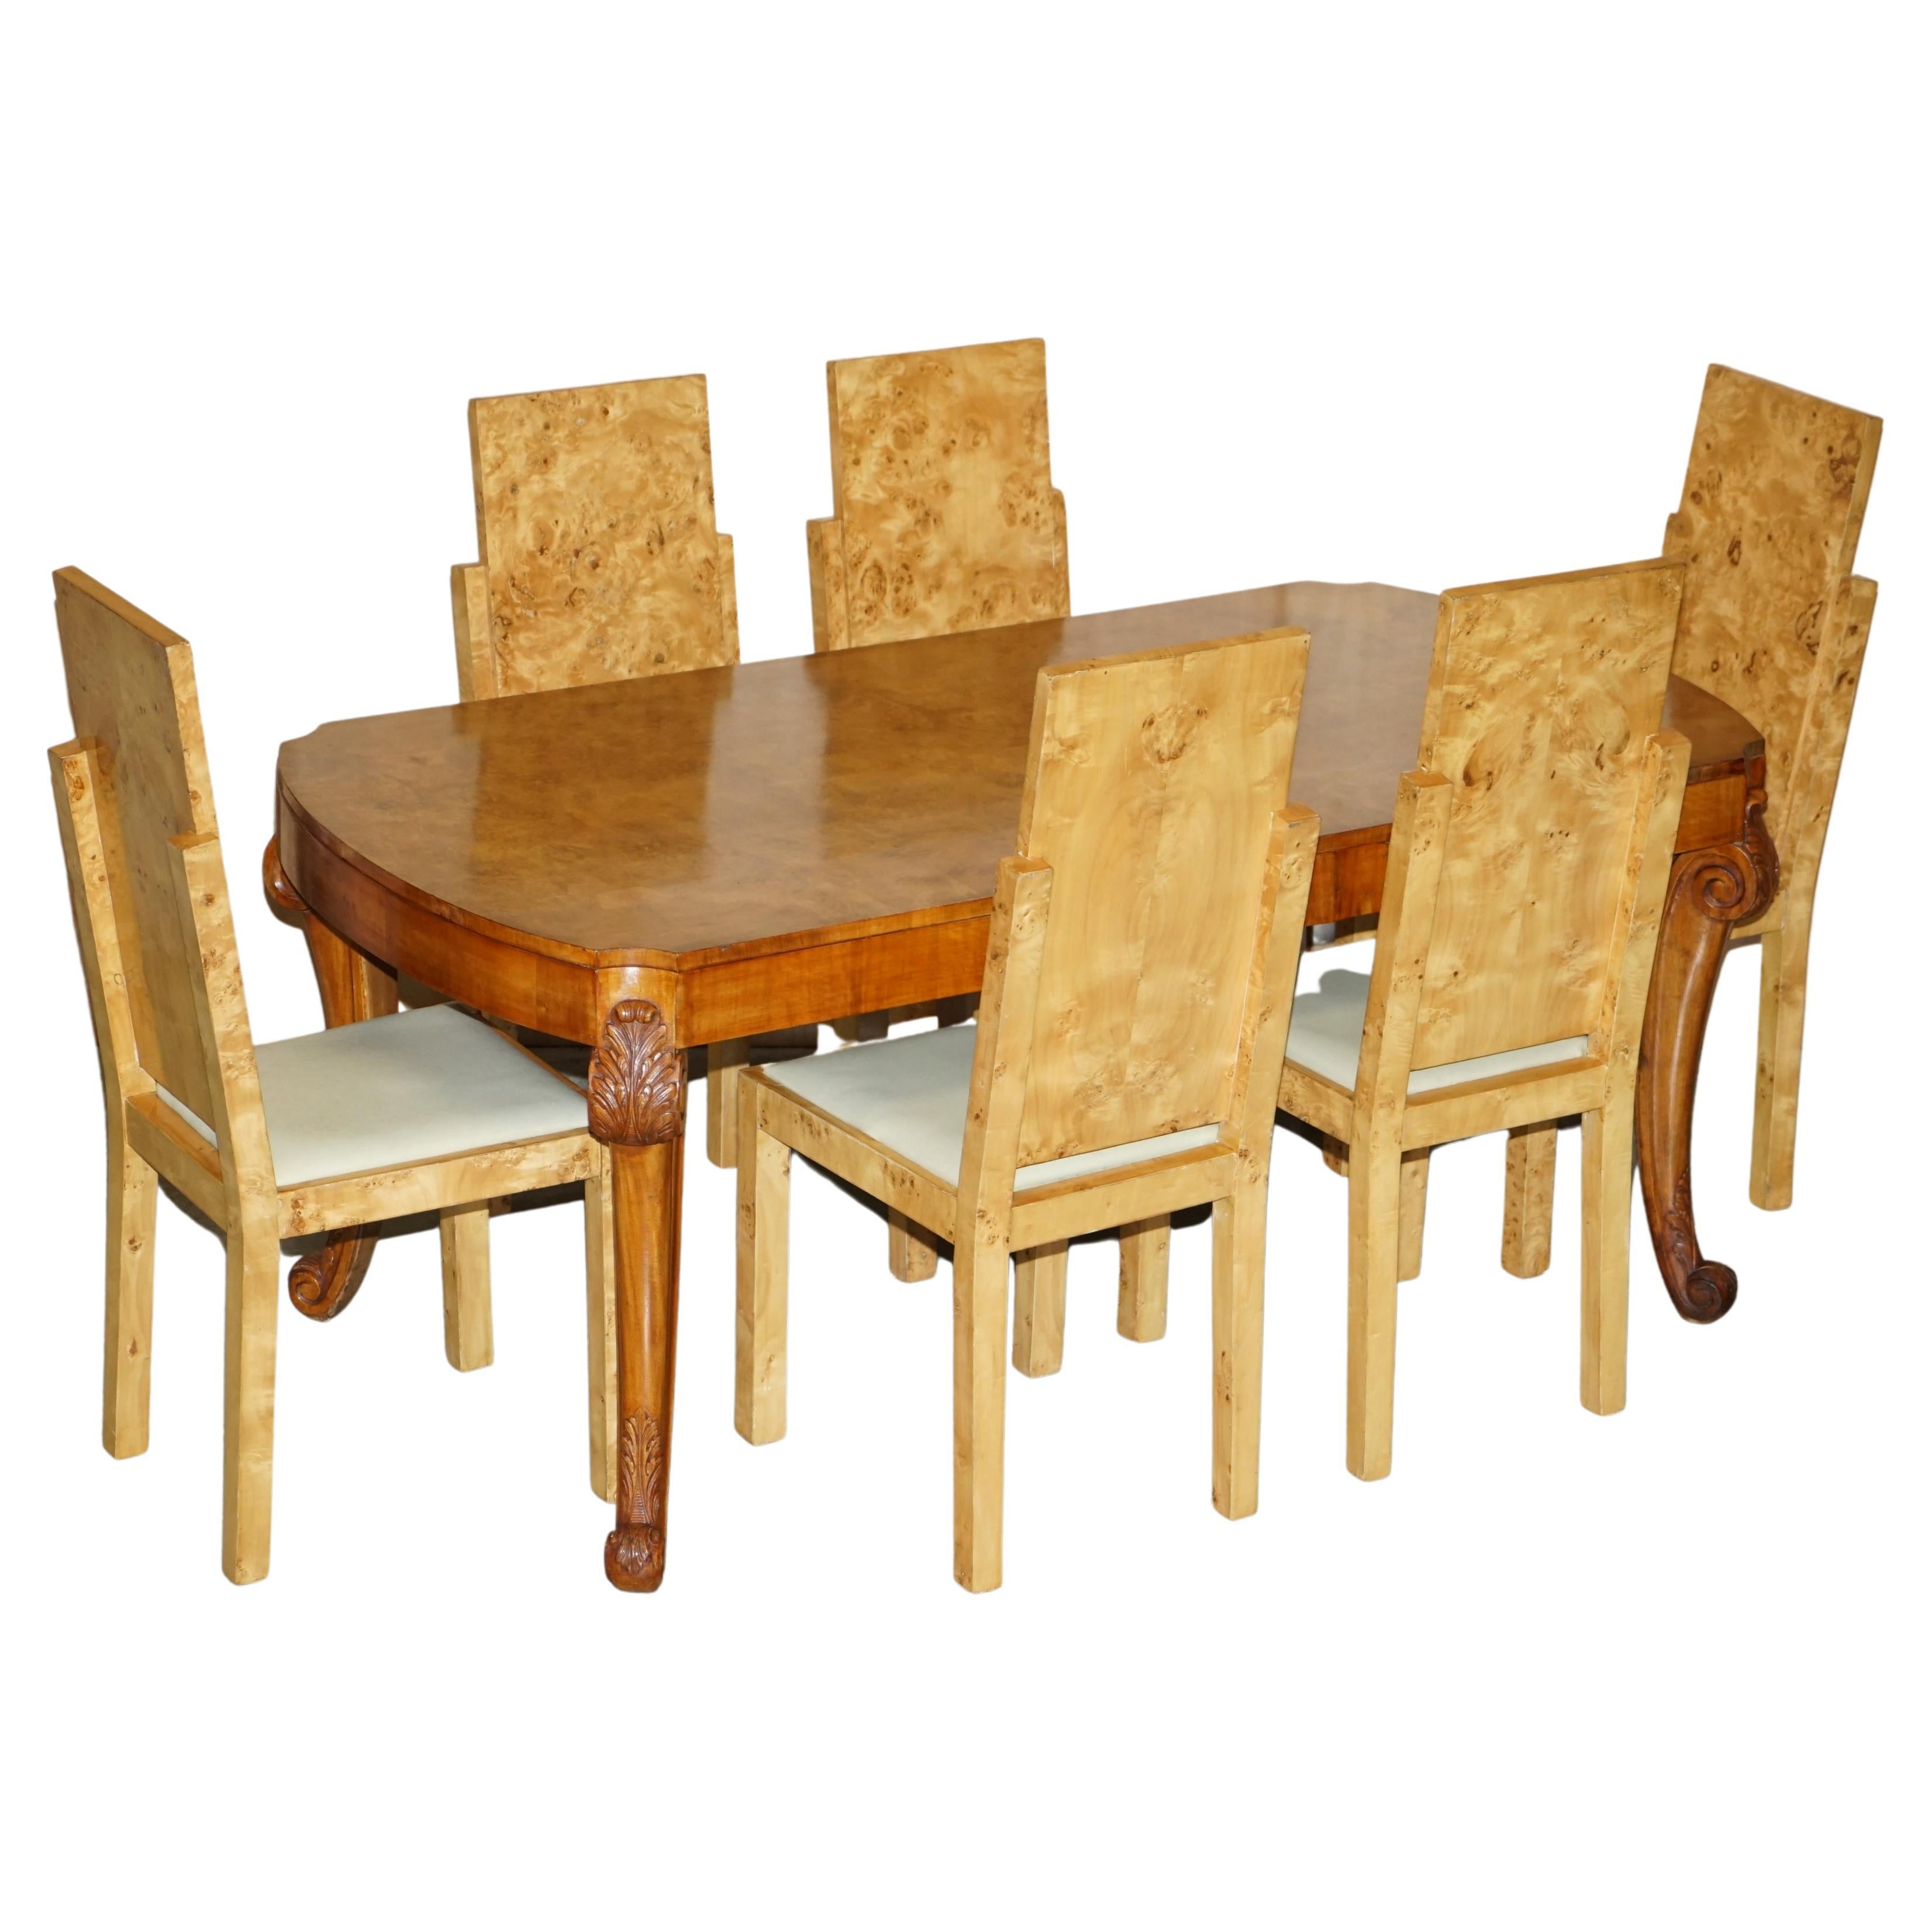 Vintage Art Deco Burr Walnut Ornately Carved Dining Table and 6 Dining Chairs For Sale